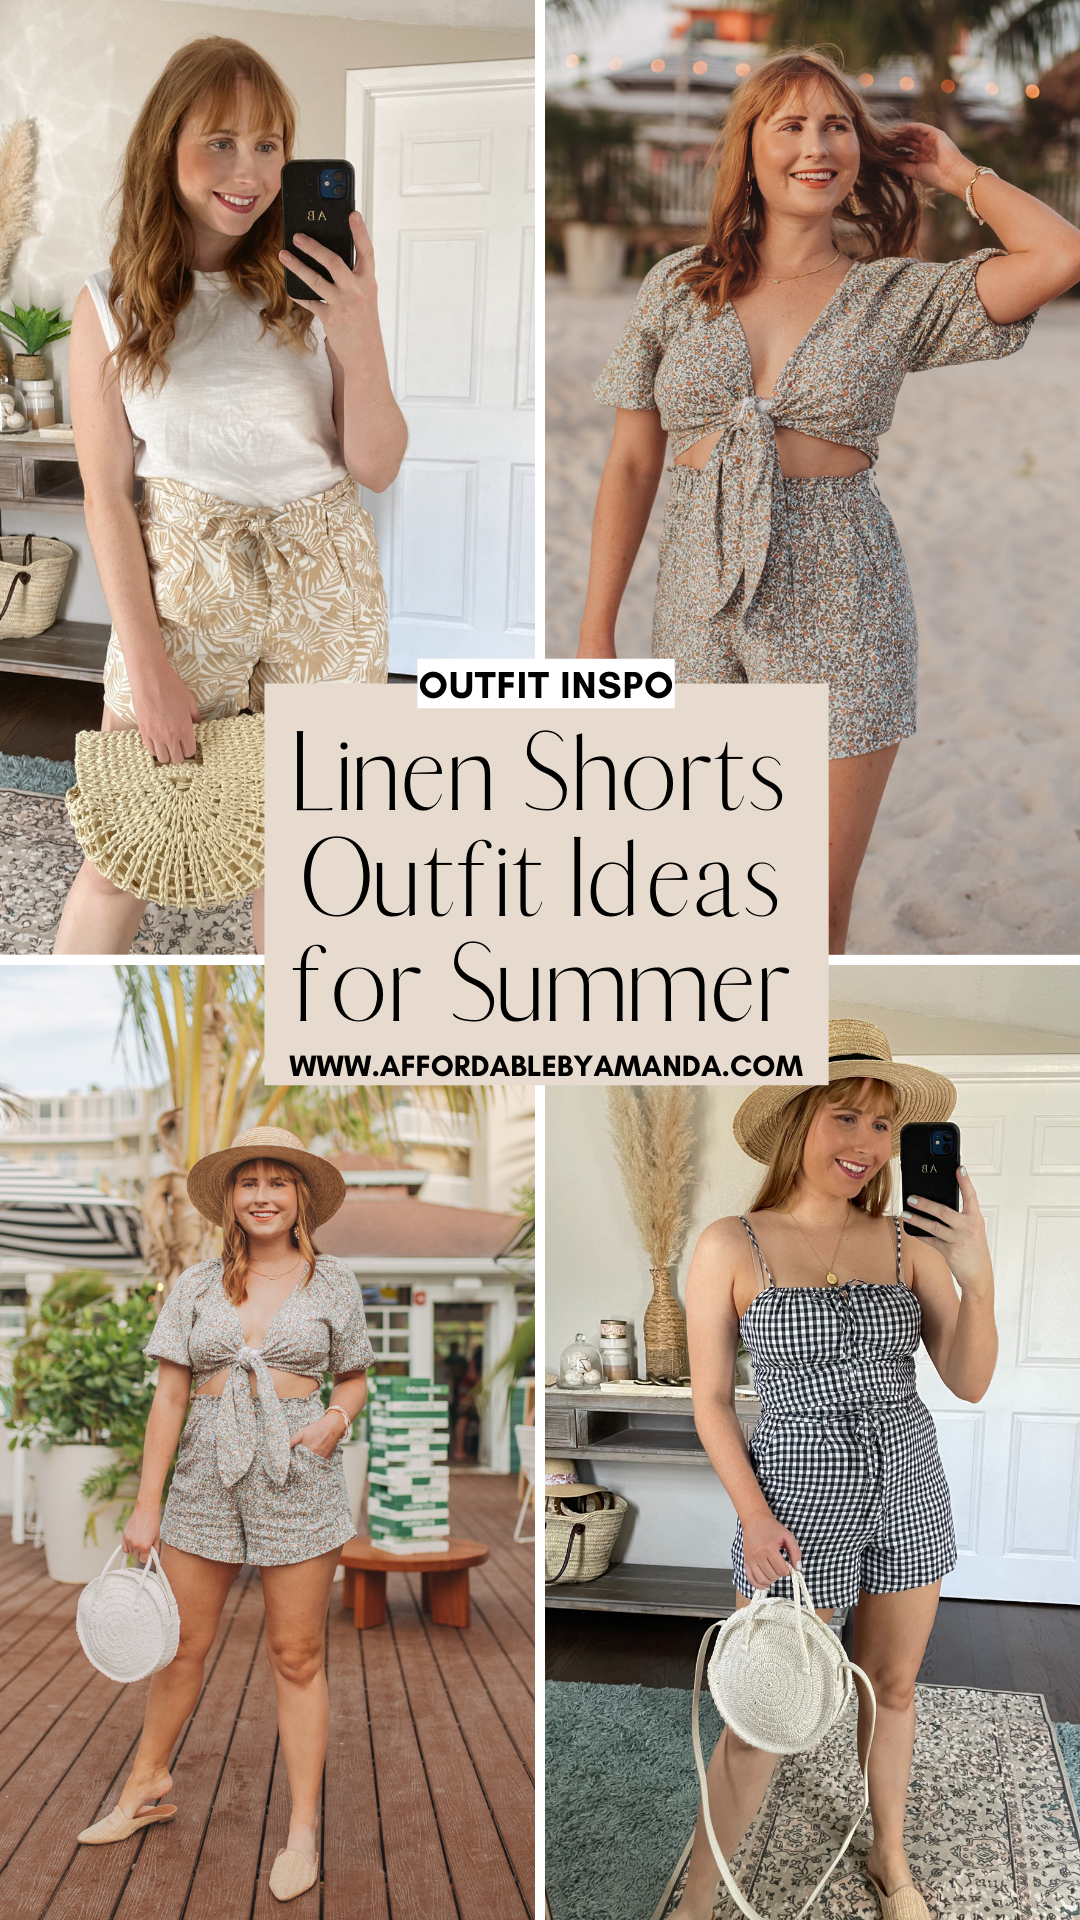 9 Best Ways To Wear Linen Shorts for Summer (Chic Outfit Ideas)